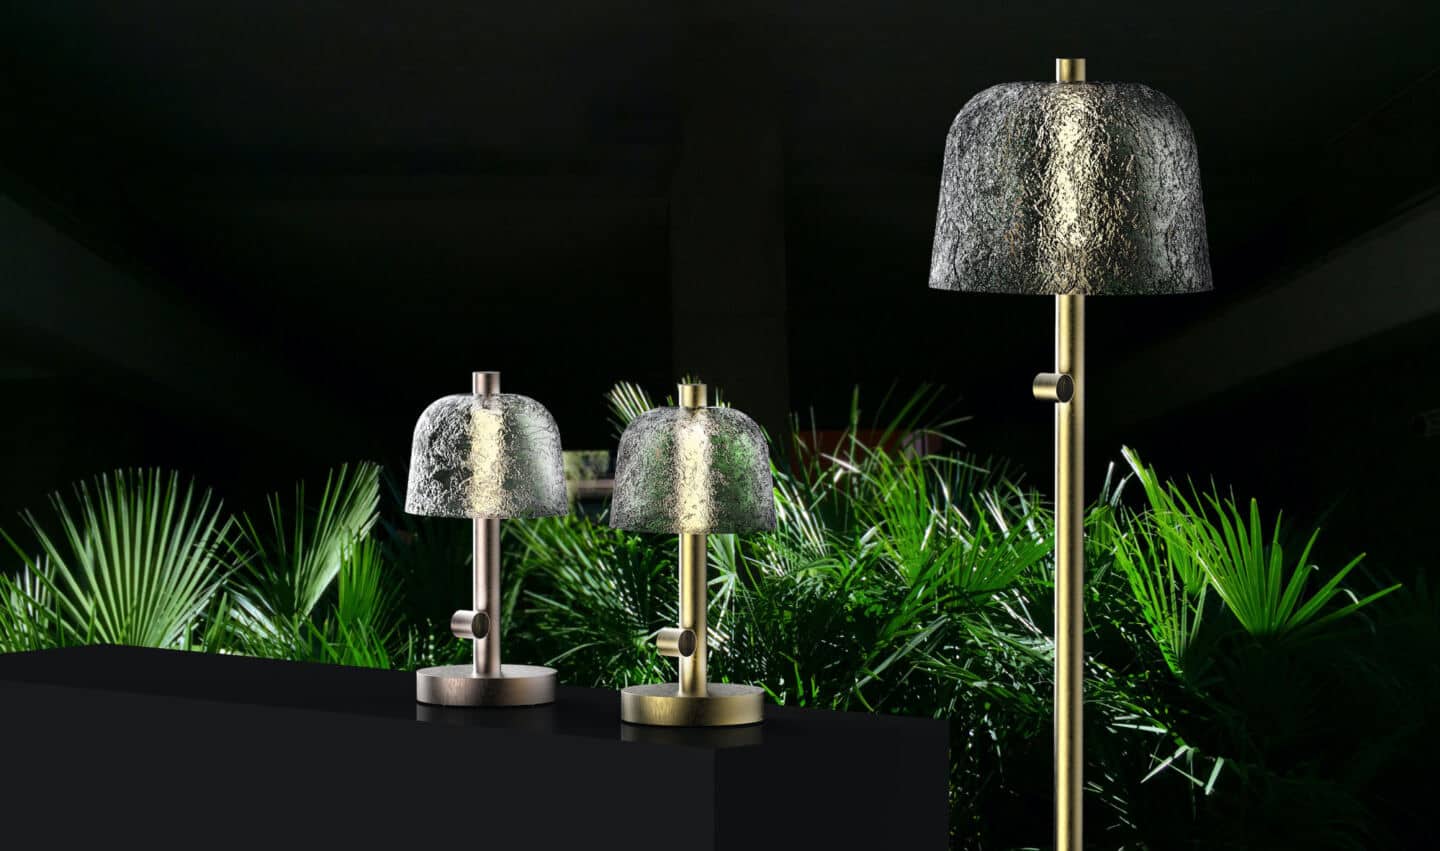 Lasvit table lamps shaped like mushrooms and the glass lamp shade was blown i to mycelium moulds.